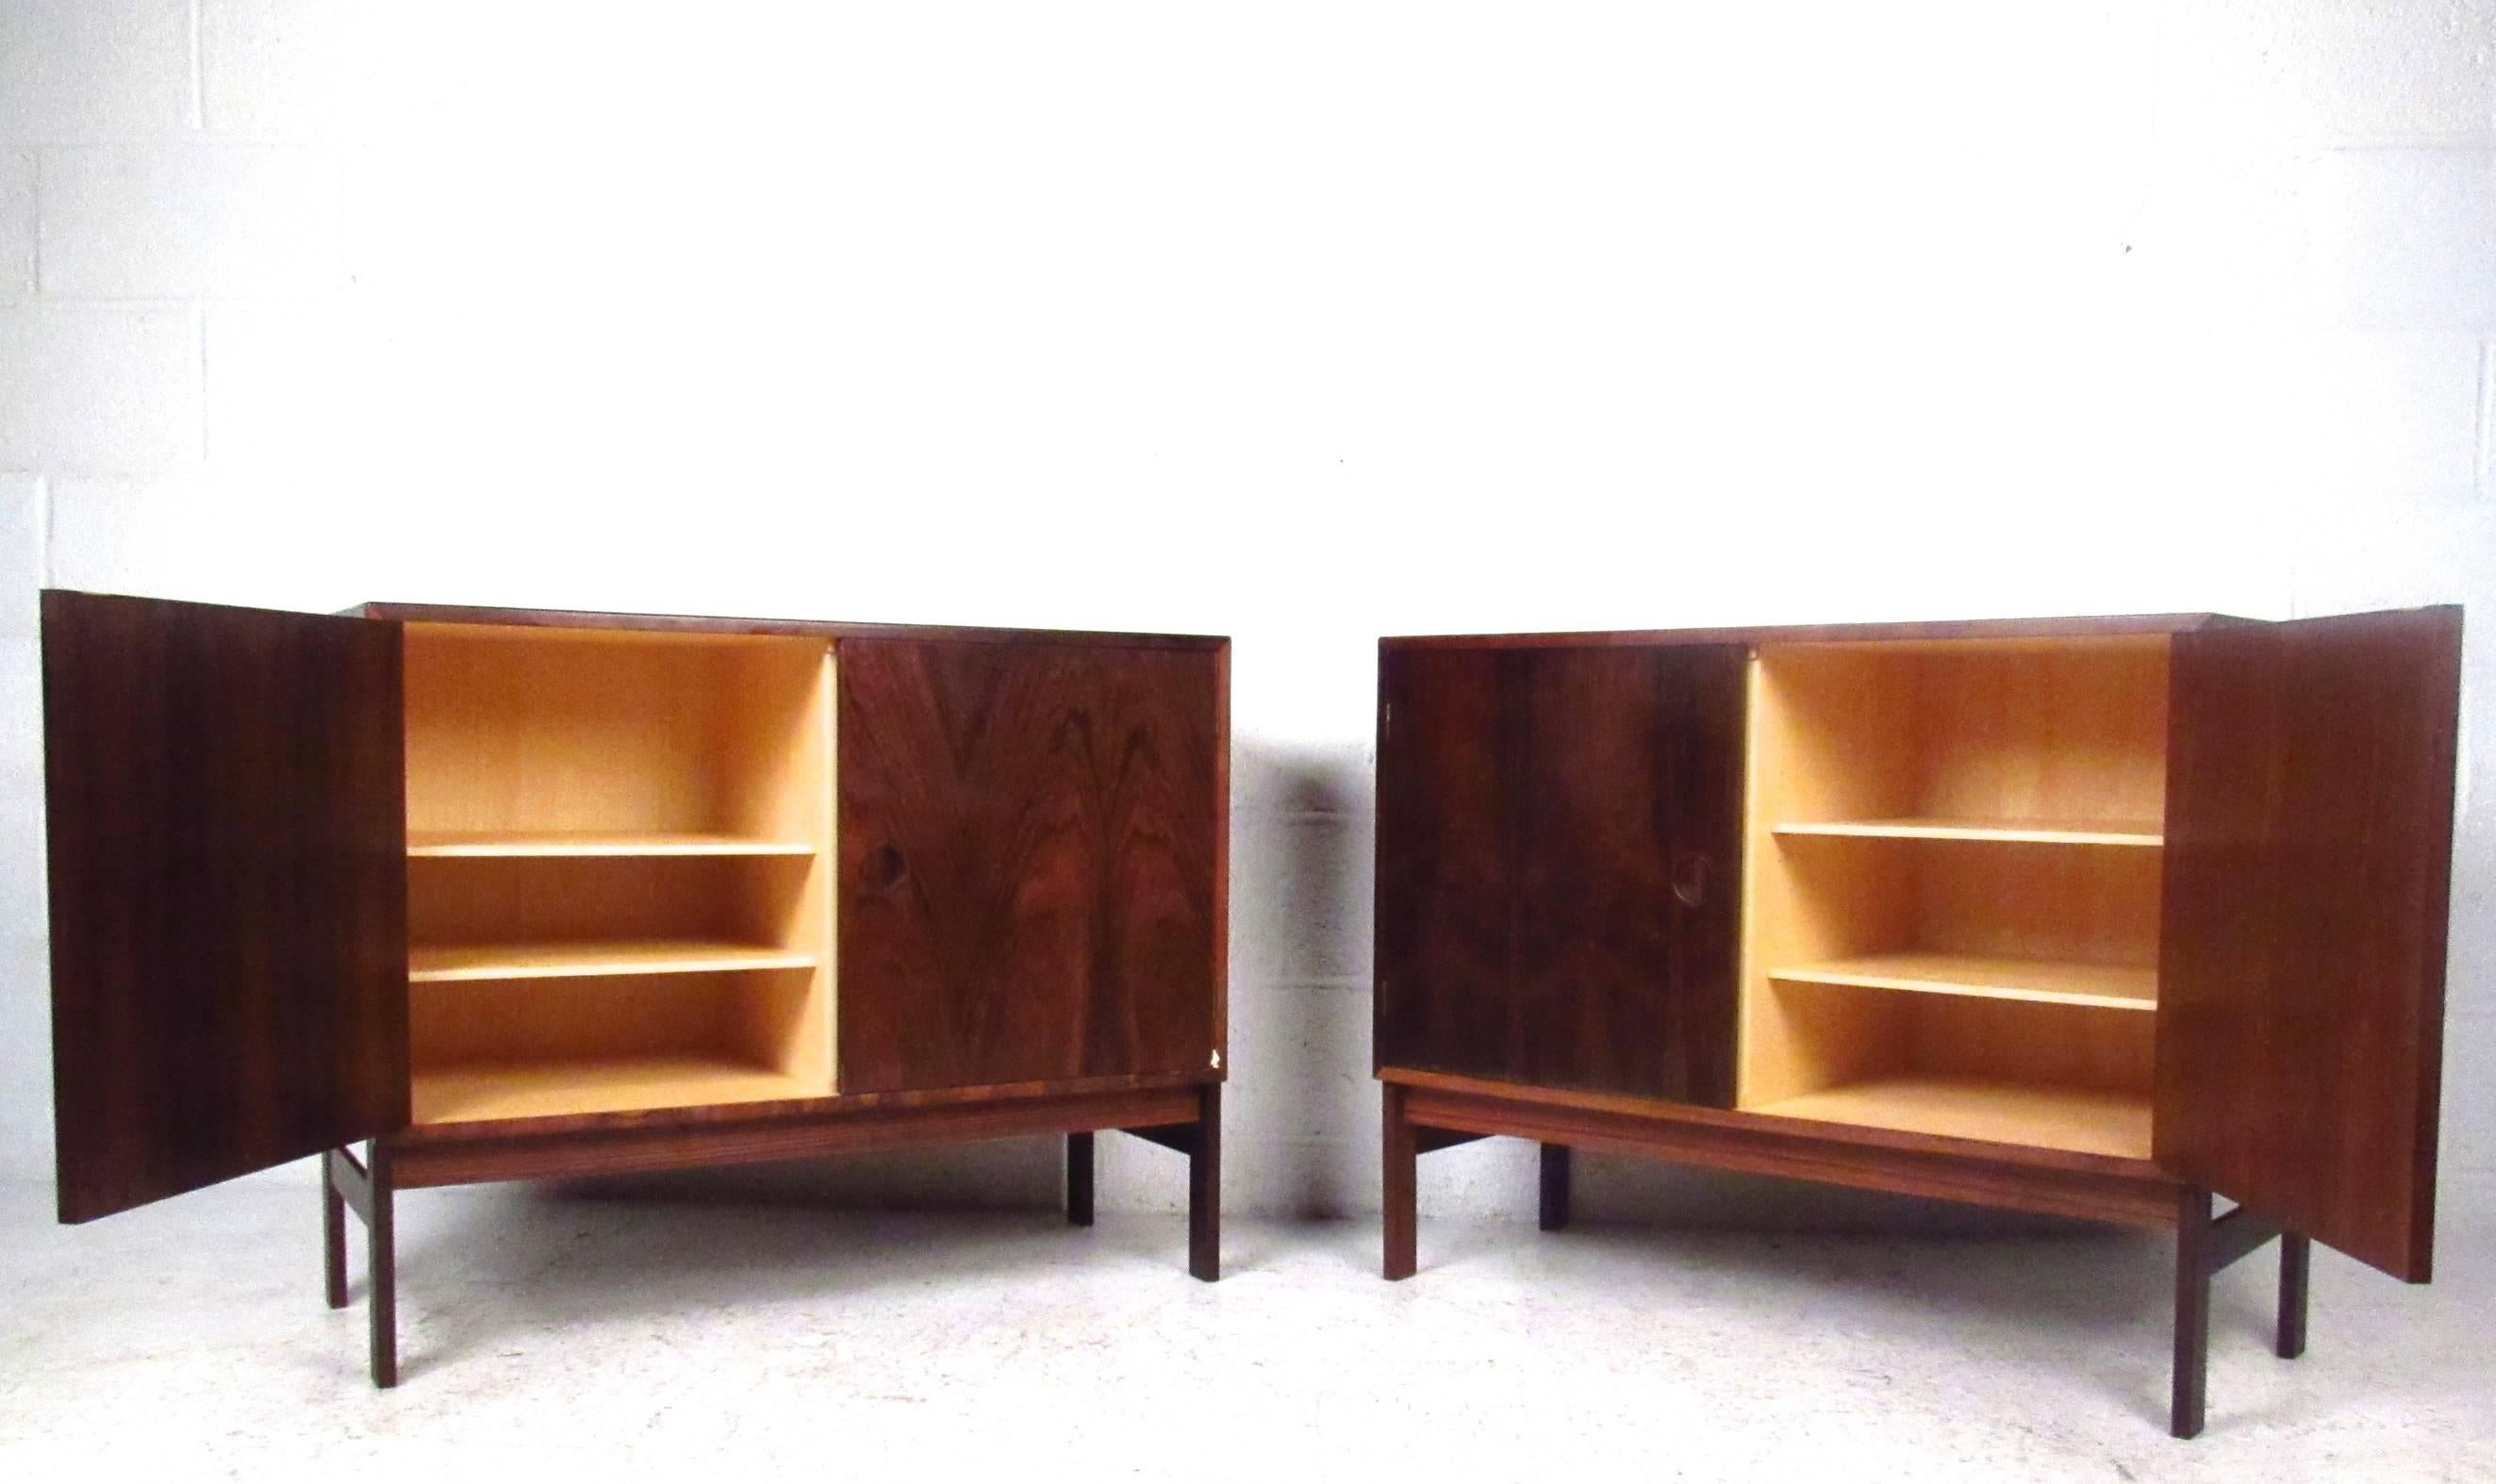 This beautiful vintage pair of cabinets are stamped by the manufacturer as made in Denmark and feature adjustable shelves, rich rosewood finish, and plenty of internal storage space. Please confirm item location (NY or NJ).